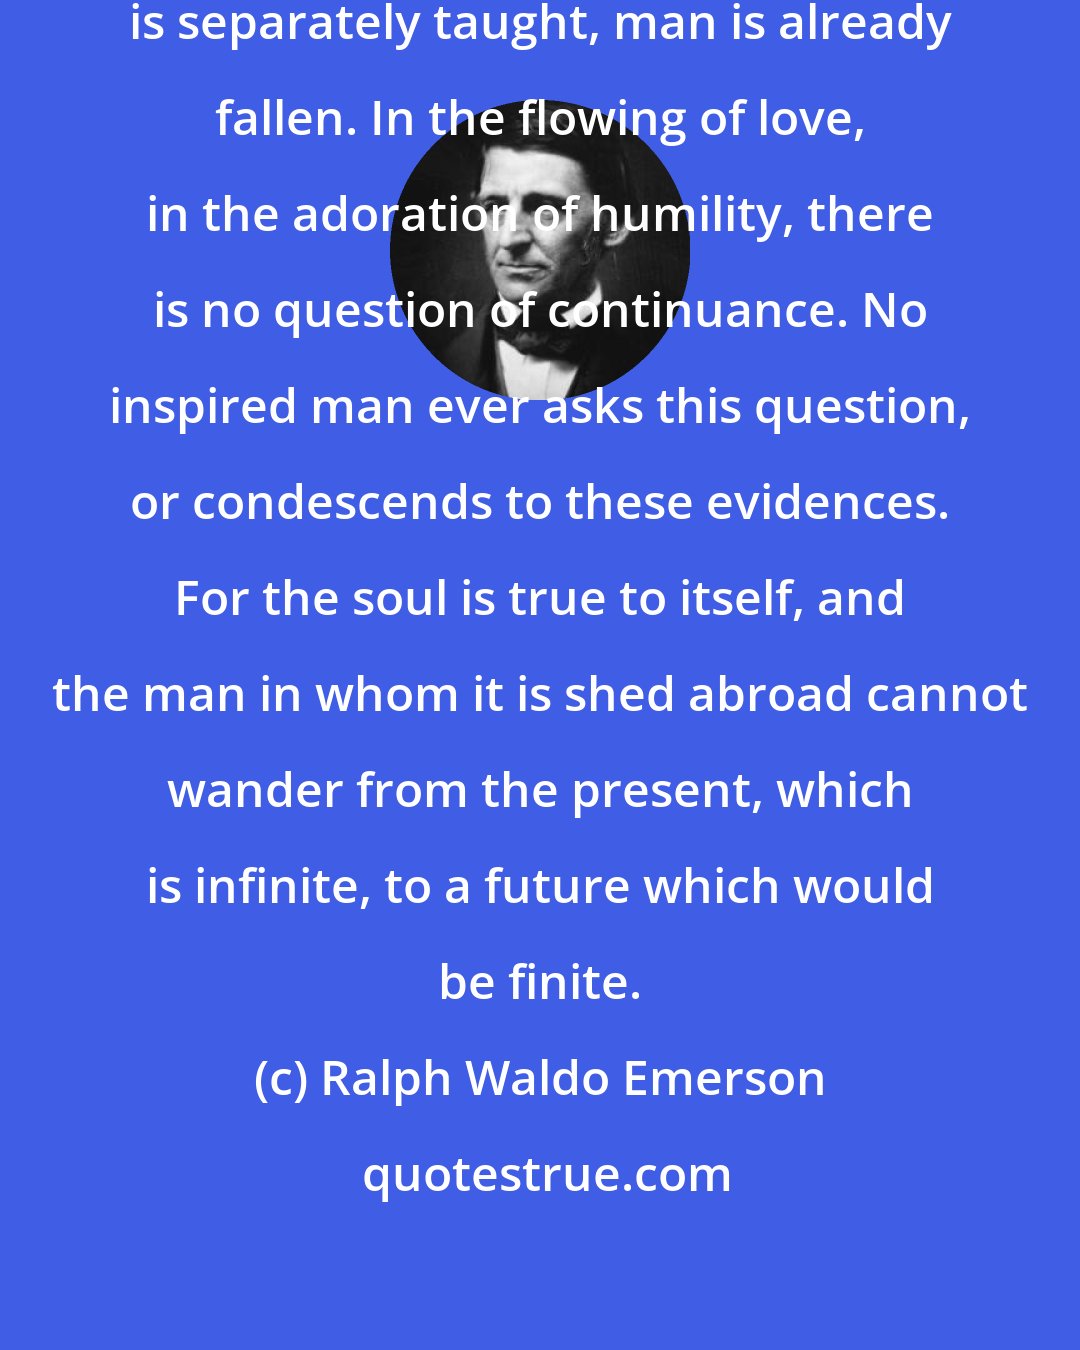 Ralph Waldo Emerson: The moment the doctrine of the immortality is separately taught, man is already fallen. In the flowing of love, in the adoration of humility, there is no question of continuance. No inspired man ever asks this question, or condescends to these evidences. For the soul is true to itself, and the man in whom it is shed abroad cannot wander from the present, which is infinite, to a future which would be finite.